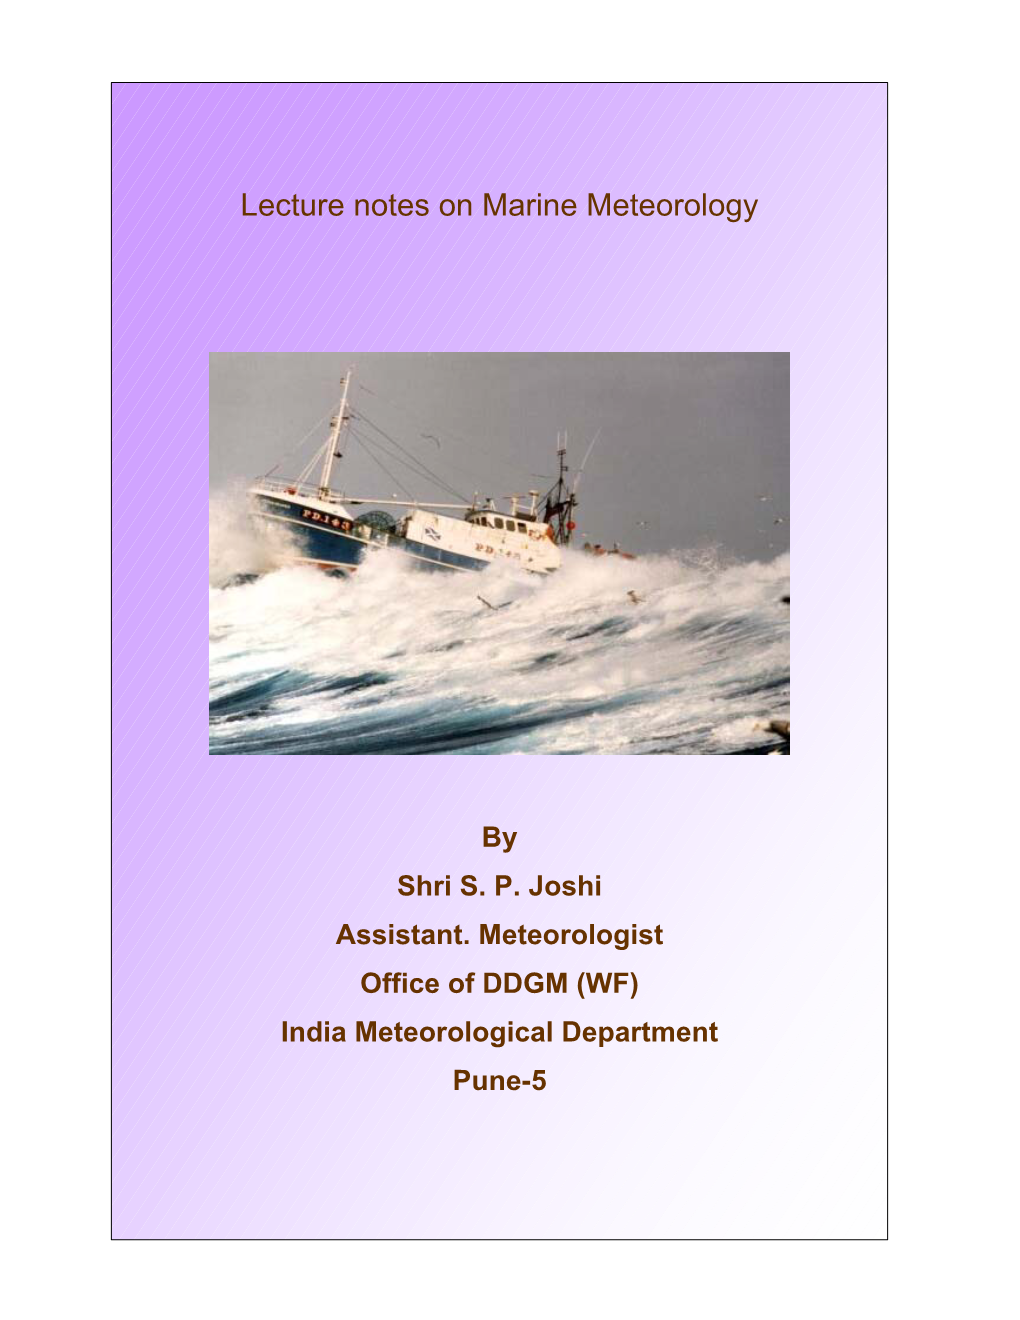 Lecture Notes on Marine Meteorology